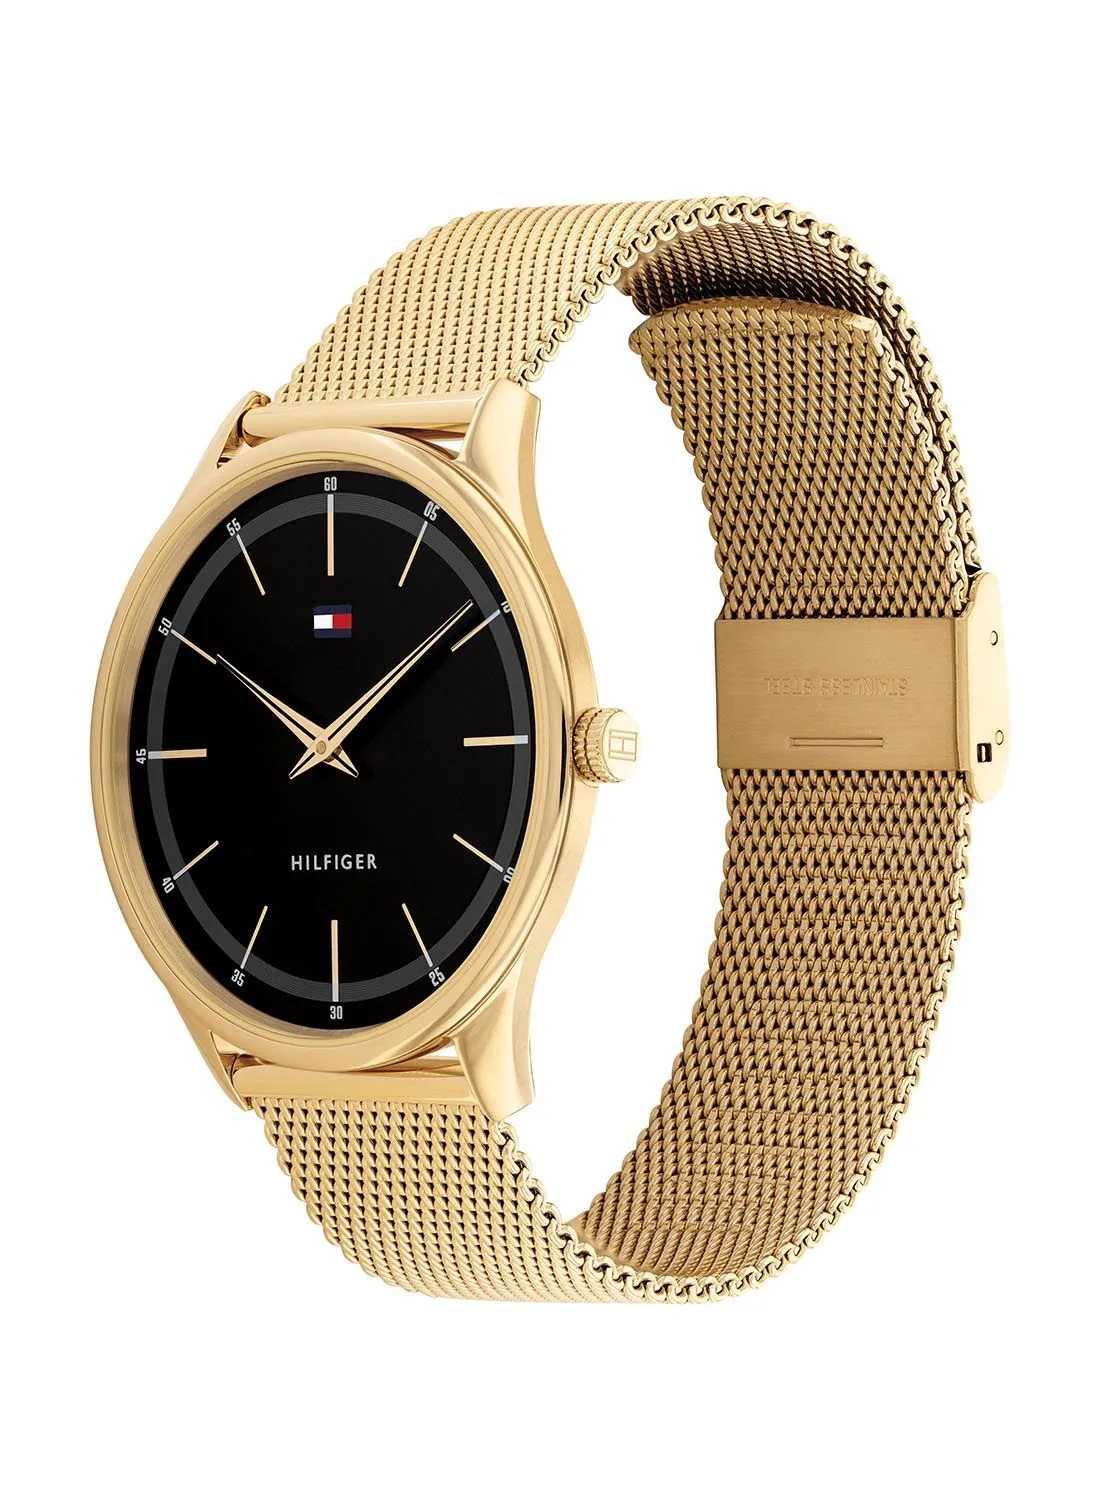 TOMMY HILFIGER TOMMY HILFIGER ADRIAN MEN's BLACK DIAL, IONIC THIN GOLD PLATED 2 STEEL WATCH - 1710469